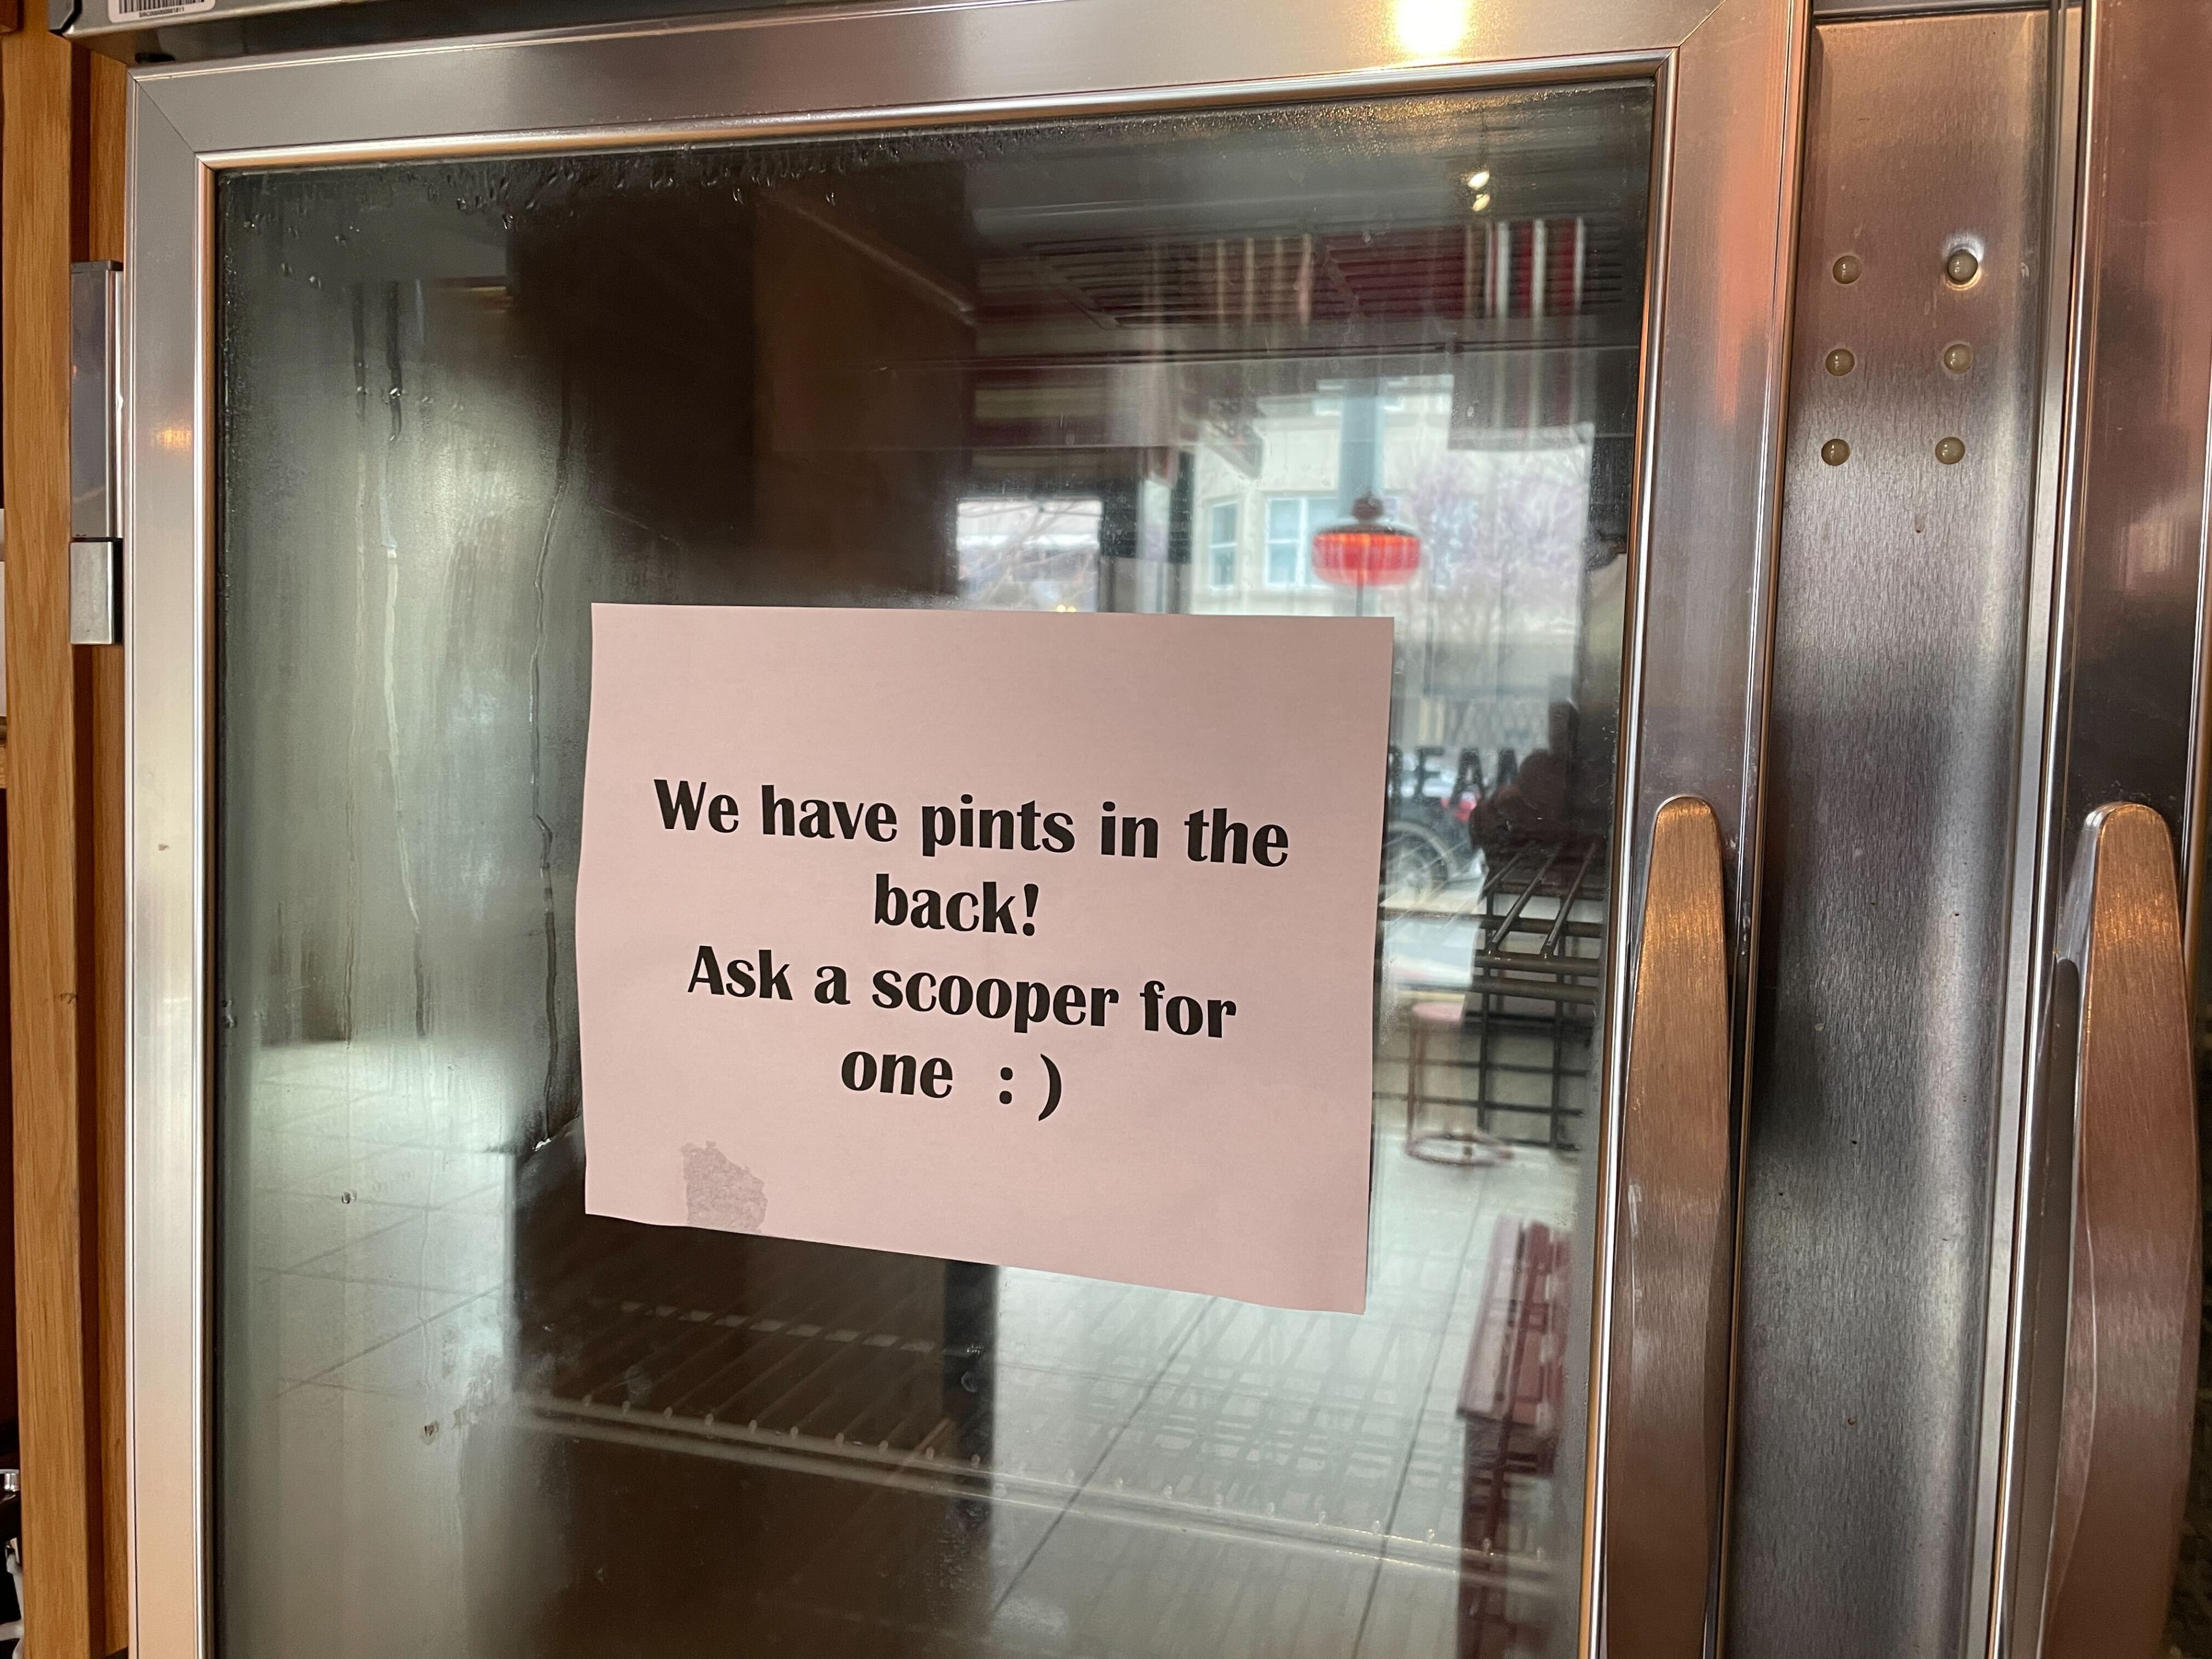 A sign on a freezer door reads &quot;We have pints in the back! Ask a scooper for one :)&quot; reflecting a casual, inviting tone.